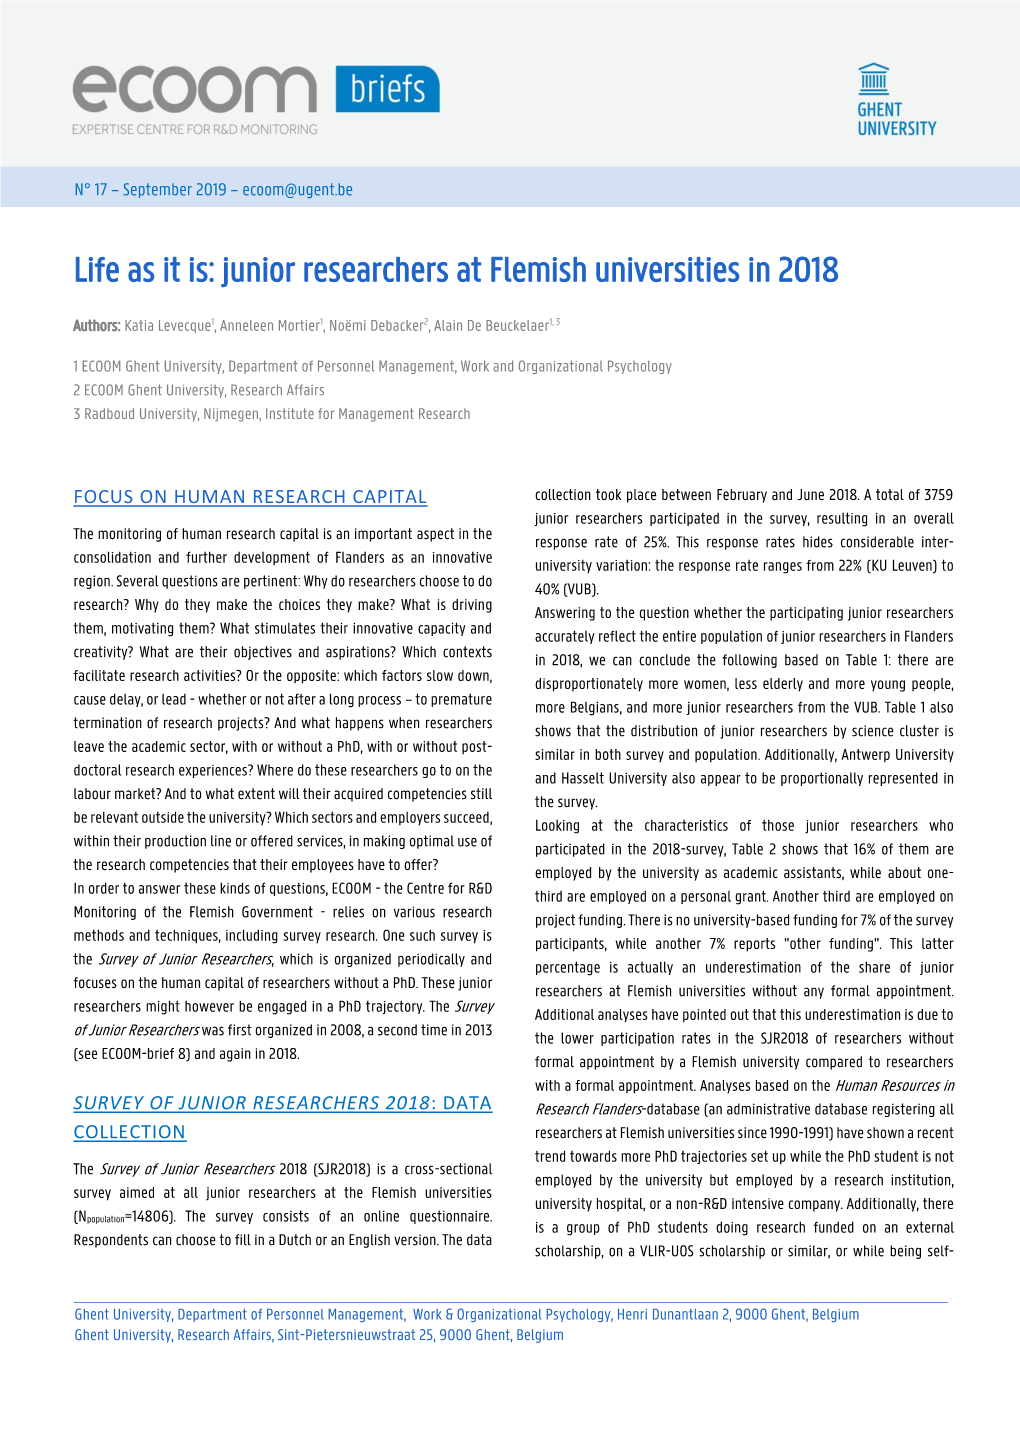 Life As It Is: Junior Researchers at Flemish Universities in 2018